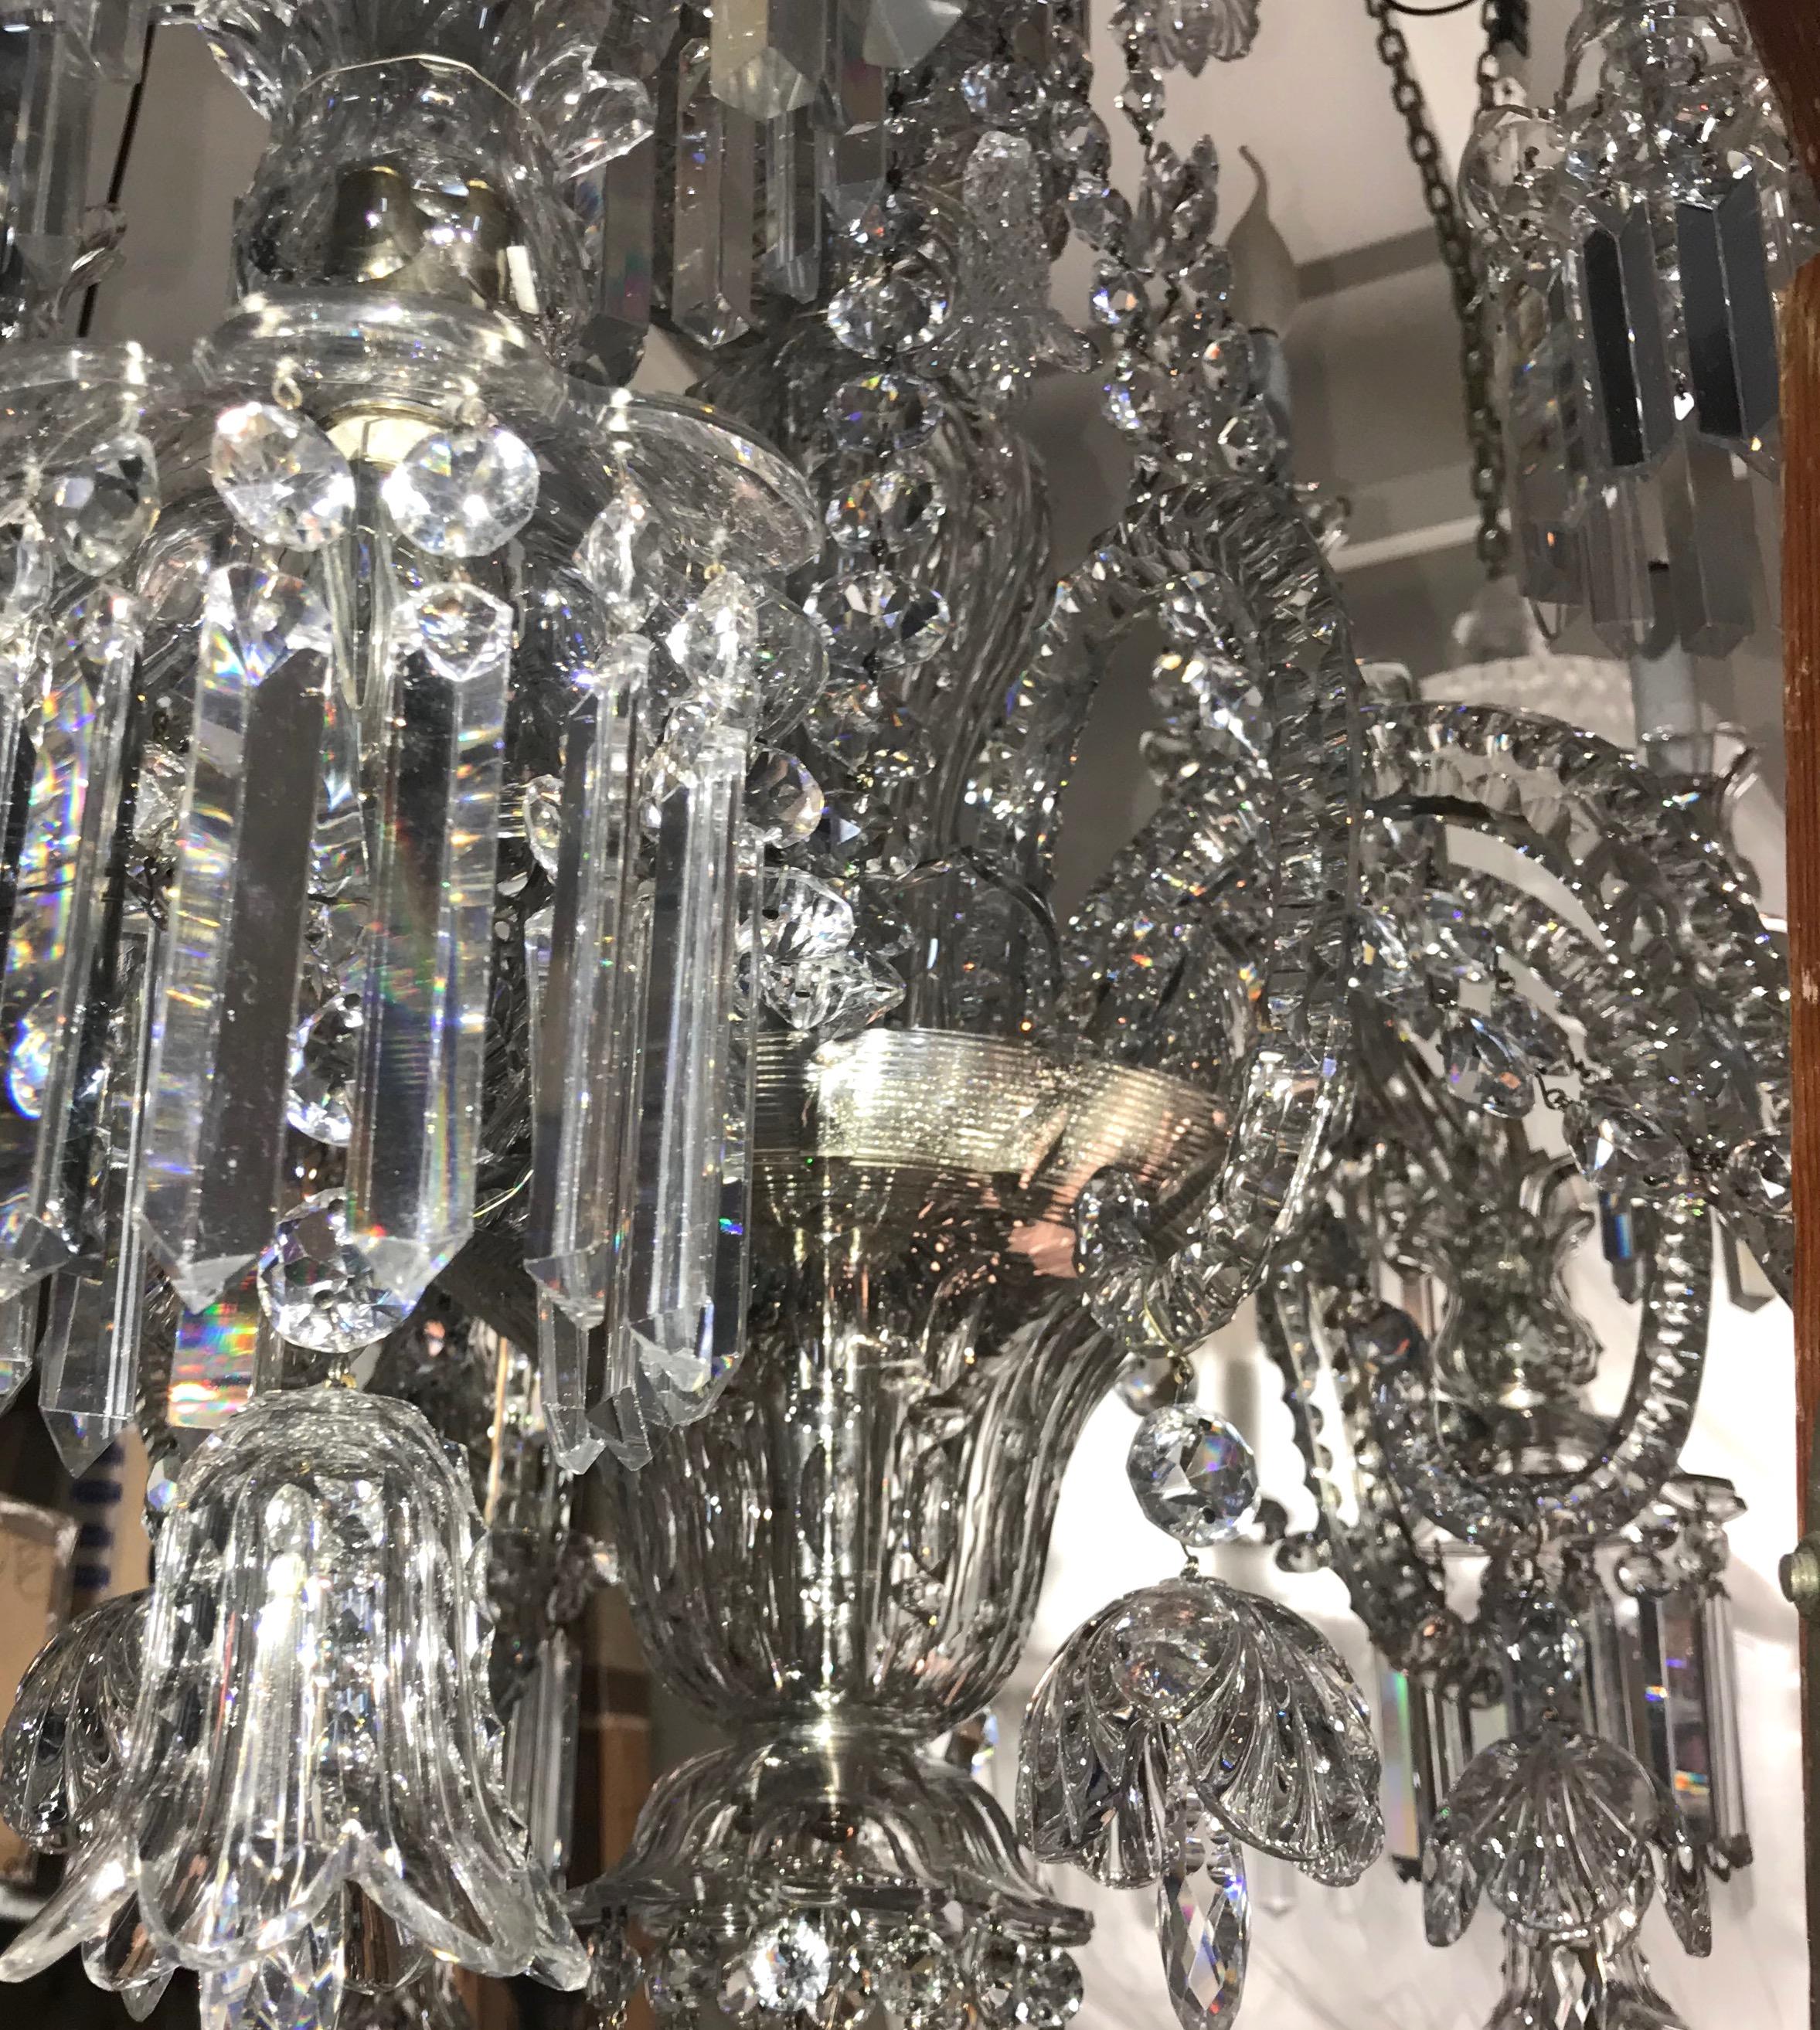 Baccarat Crystal Exceptional Chandelier, France, Early 19th Century For Sale 6